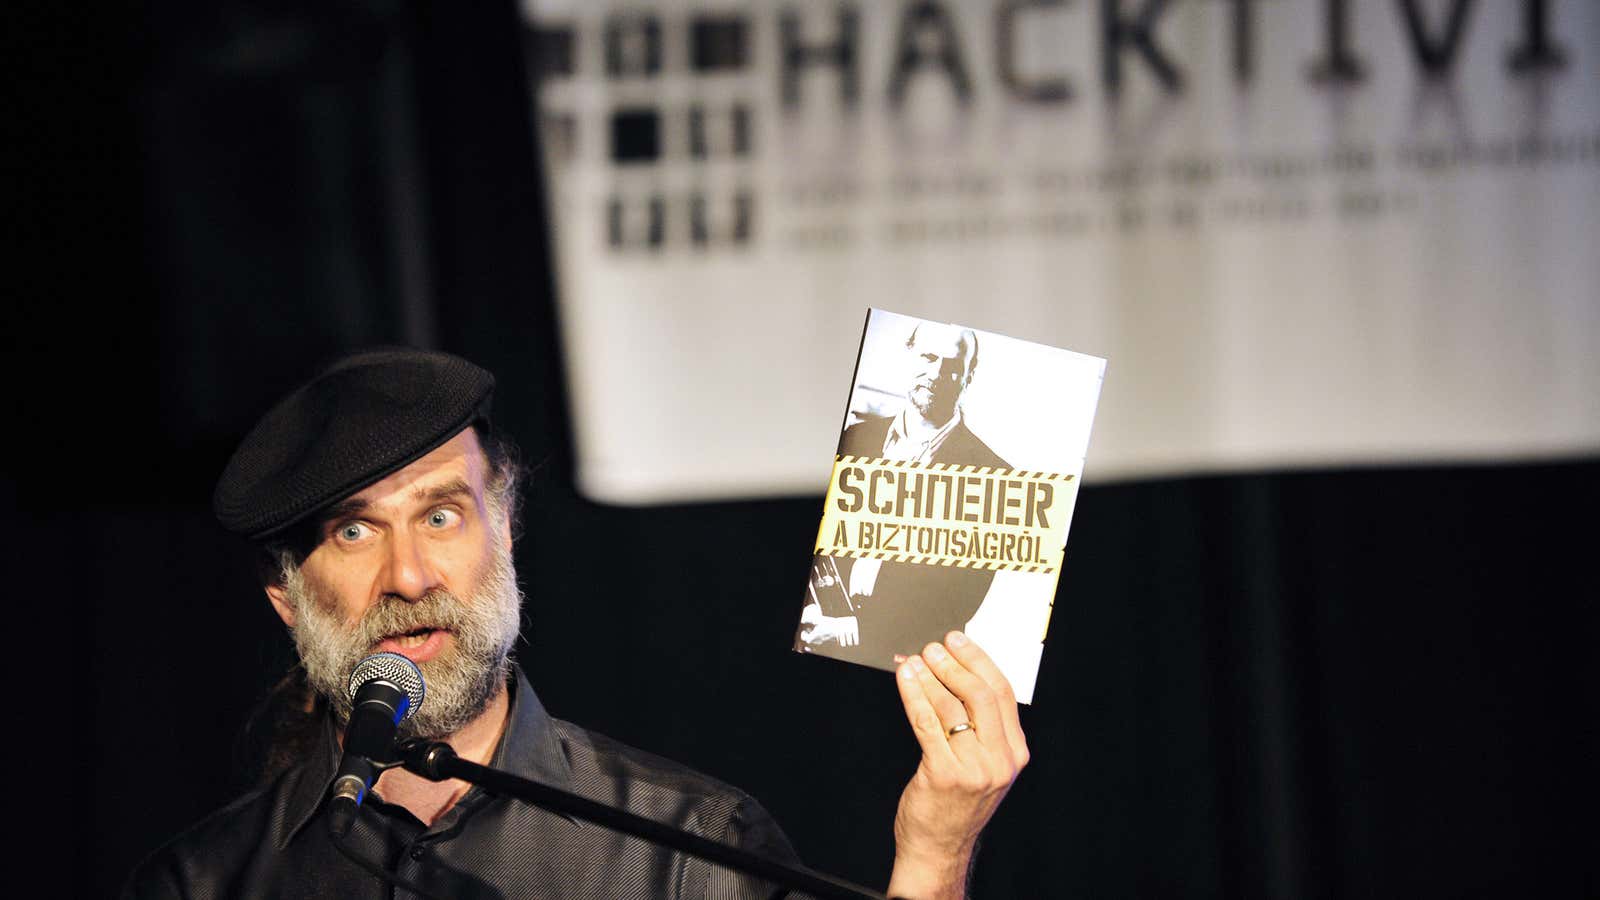 If you’re afraid of cyberwar, Bruce Schneier has some other long words for you to think about.